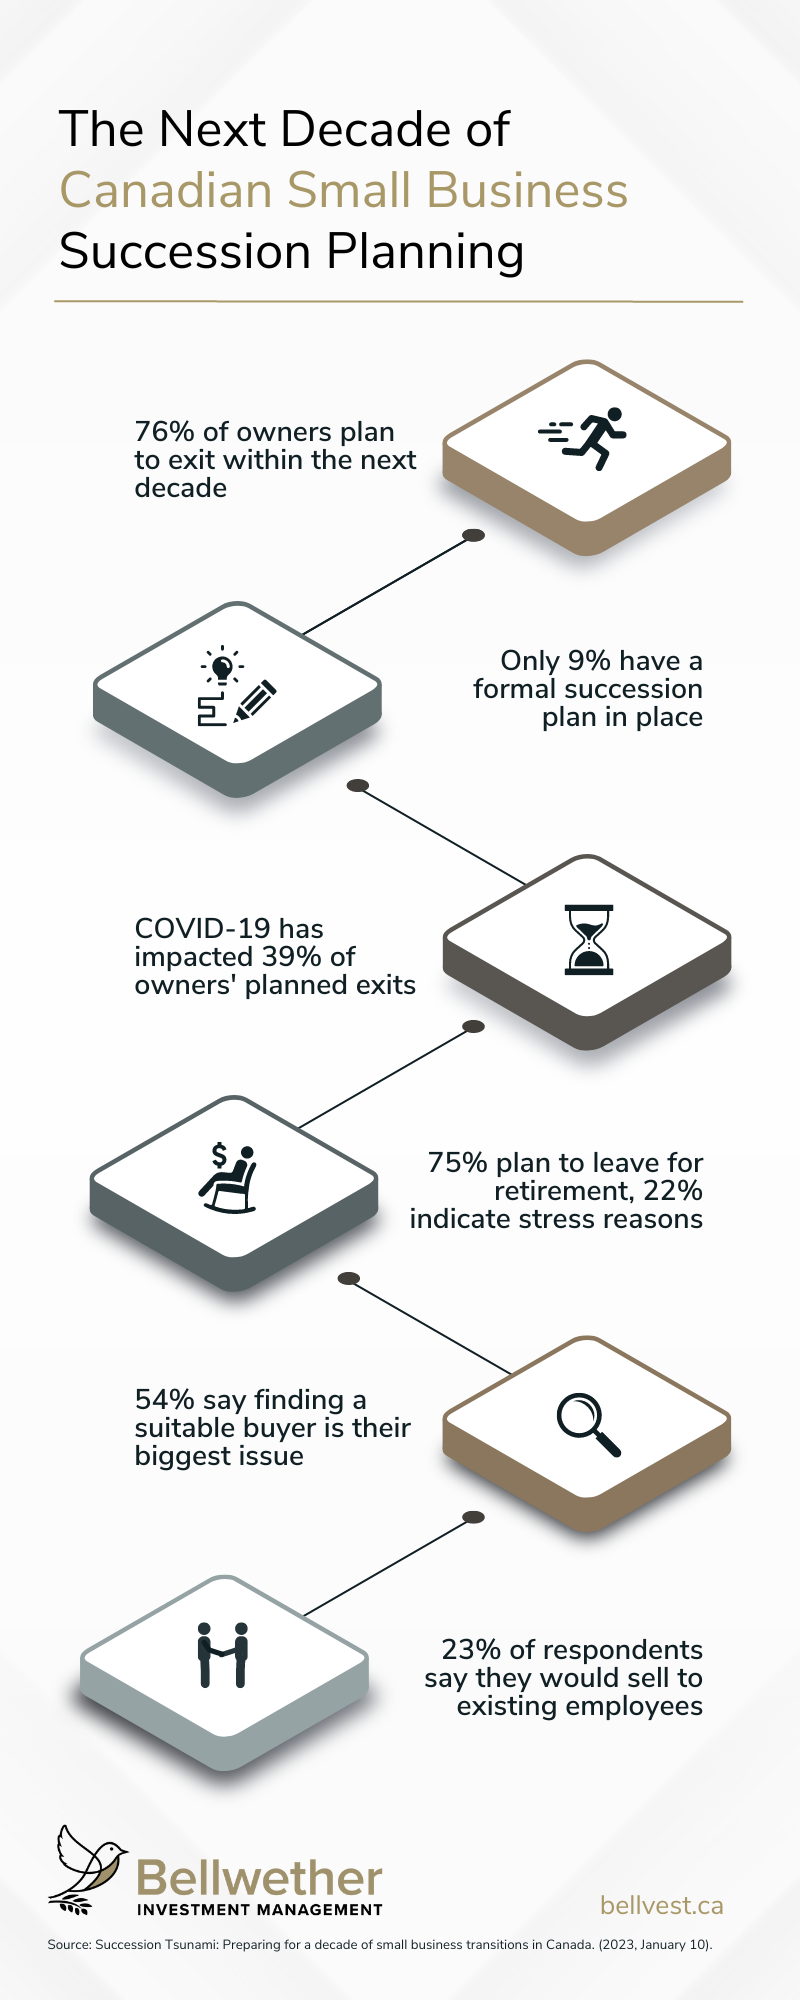 Infographic for 6 key statistics about small business owners in Canada. 1) 76% of owners plan to exit within next decade. 2) Only 9% have a success plan in place. 3) COVID-19 has impacted 39% of planned exits. 4) 75% plan to leave for retirement, 22% indicate stress reasons. 5) 54% say finding a suitable buyer is their biggest issue. 6) 23% say they would sell to existing employees.